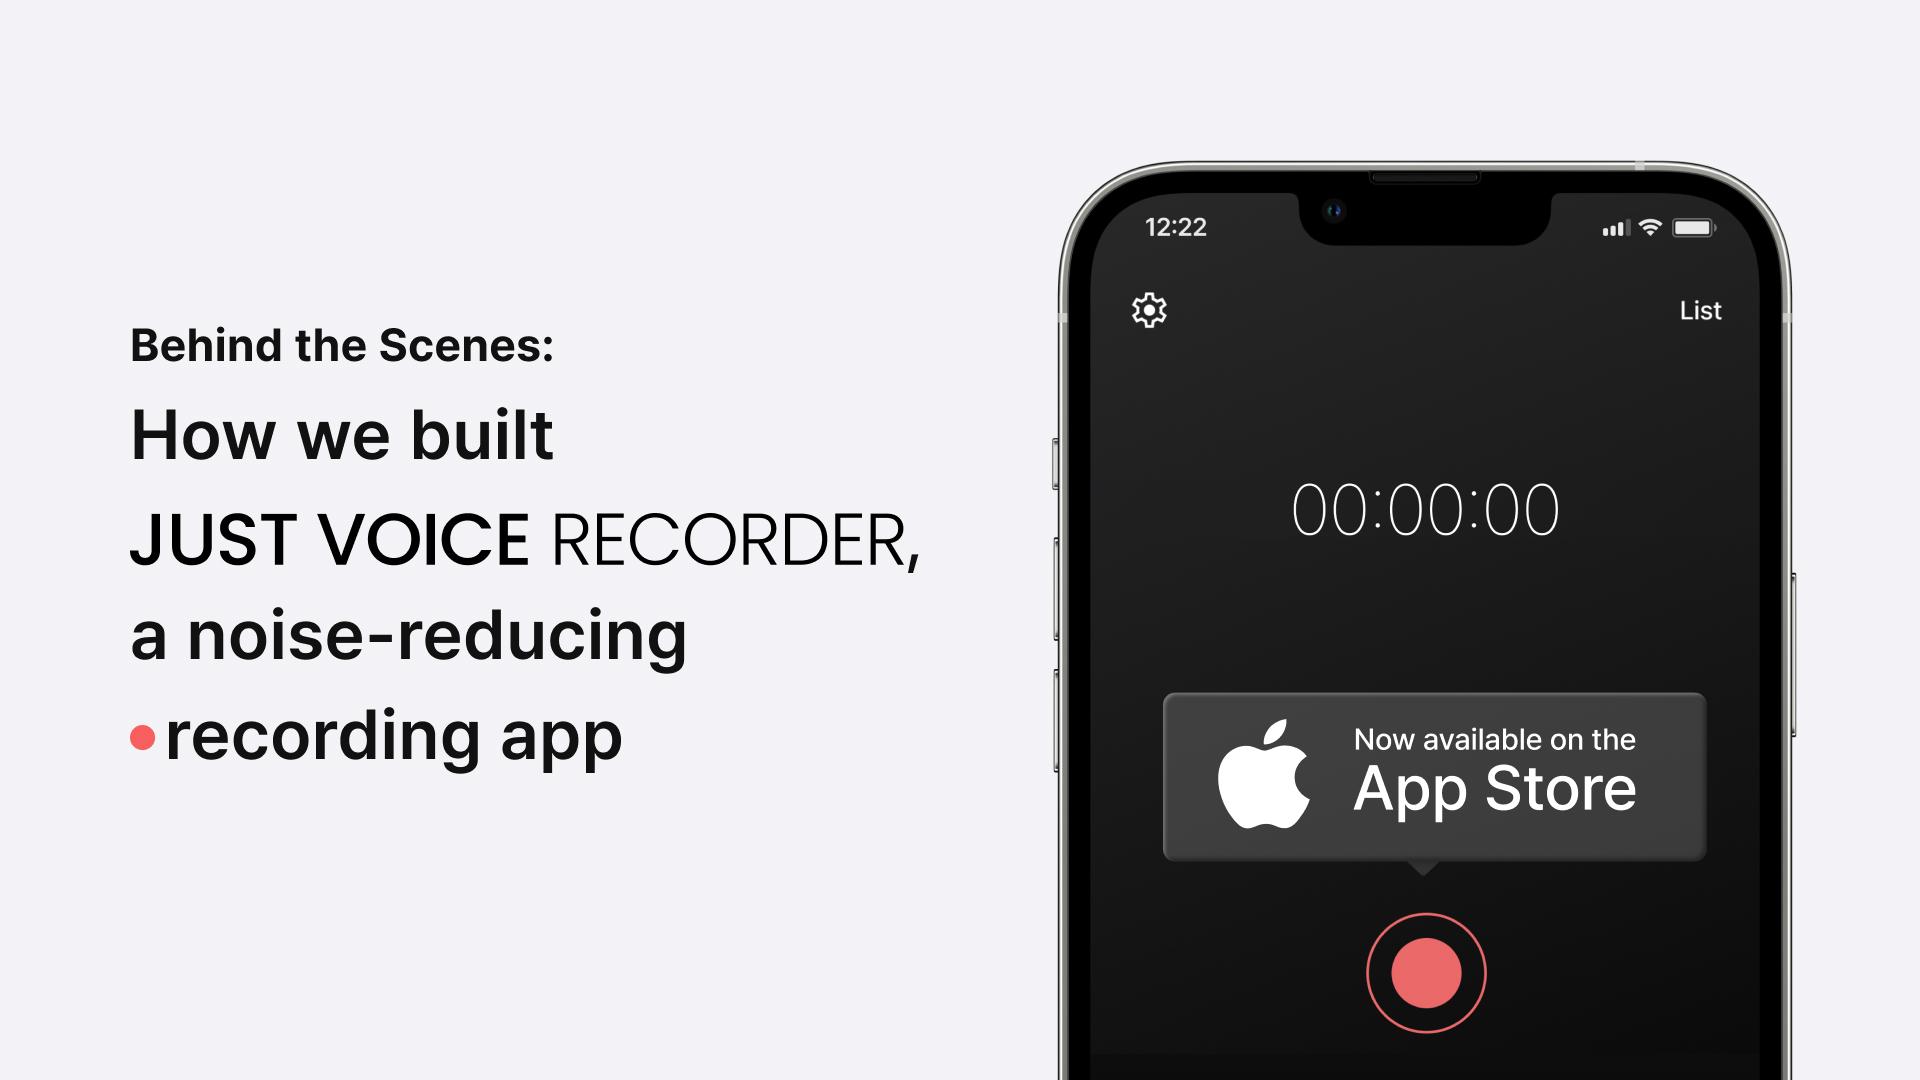 Behind the Scenes: How We Built the Just Voice Recorder, a Noise-Reducing Recording App